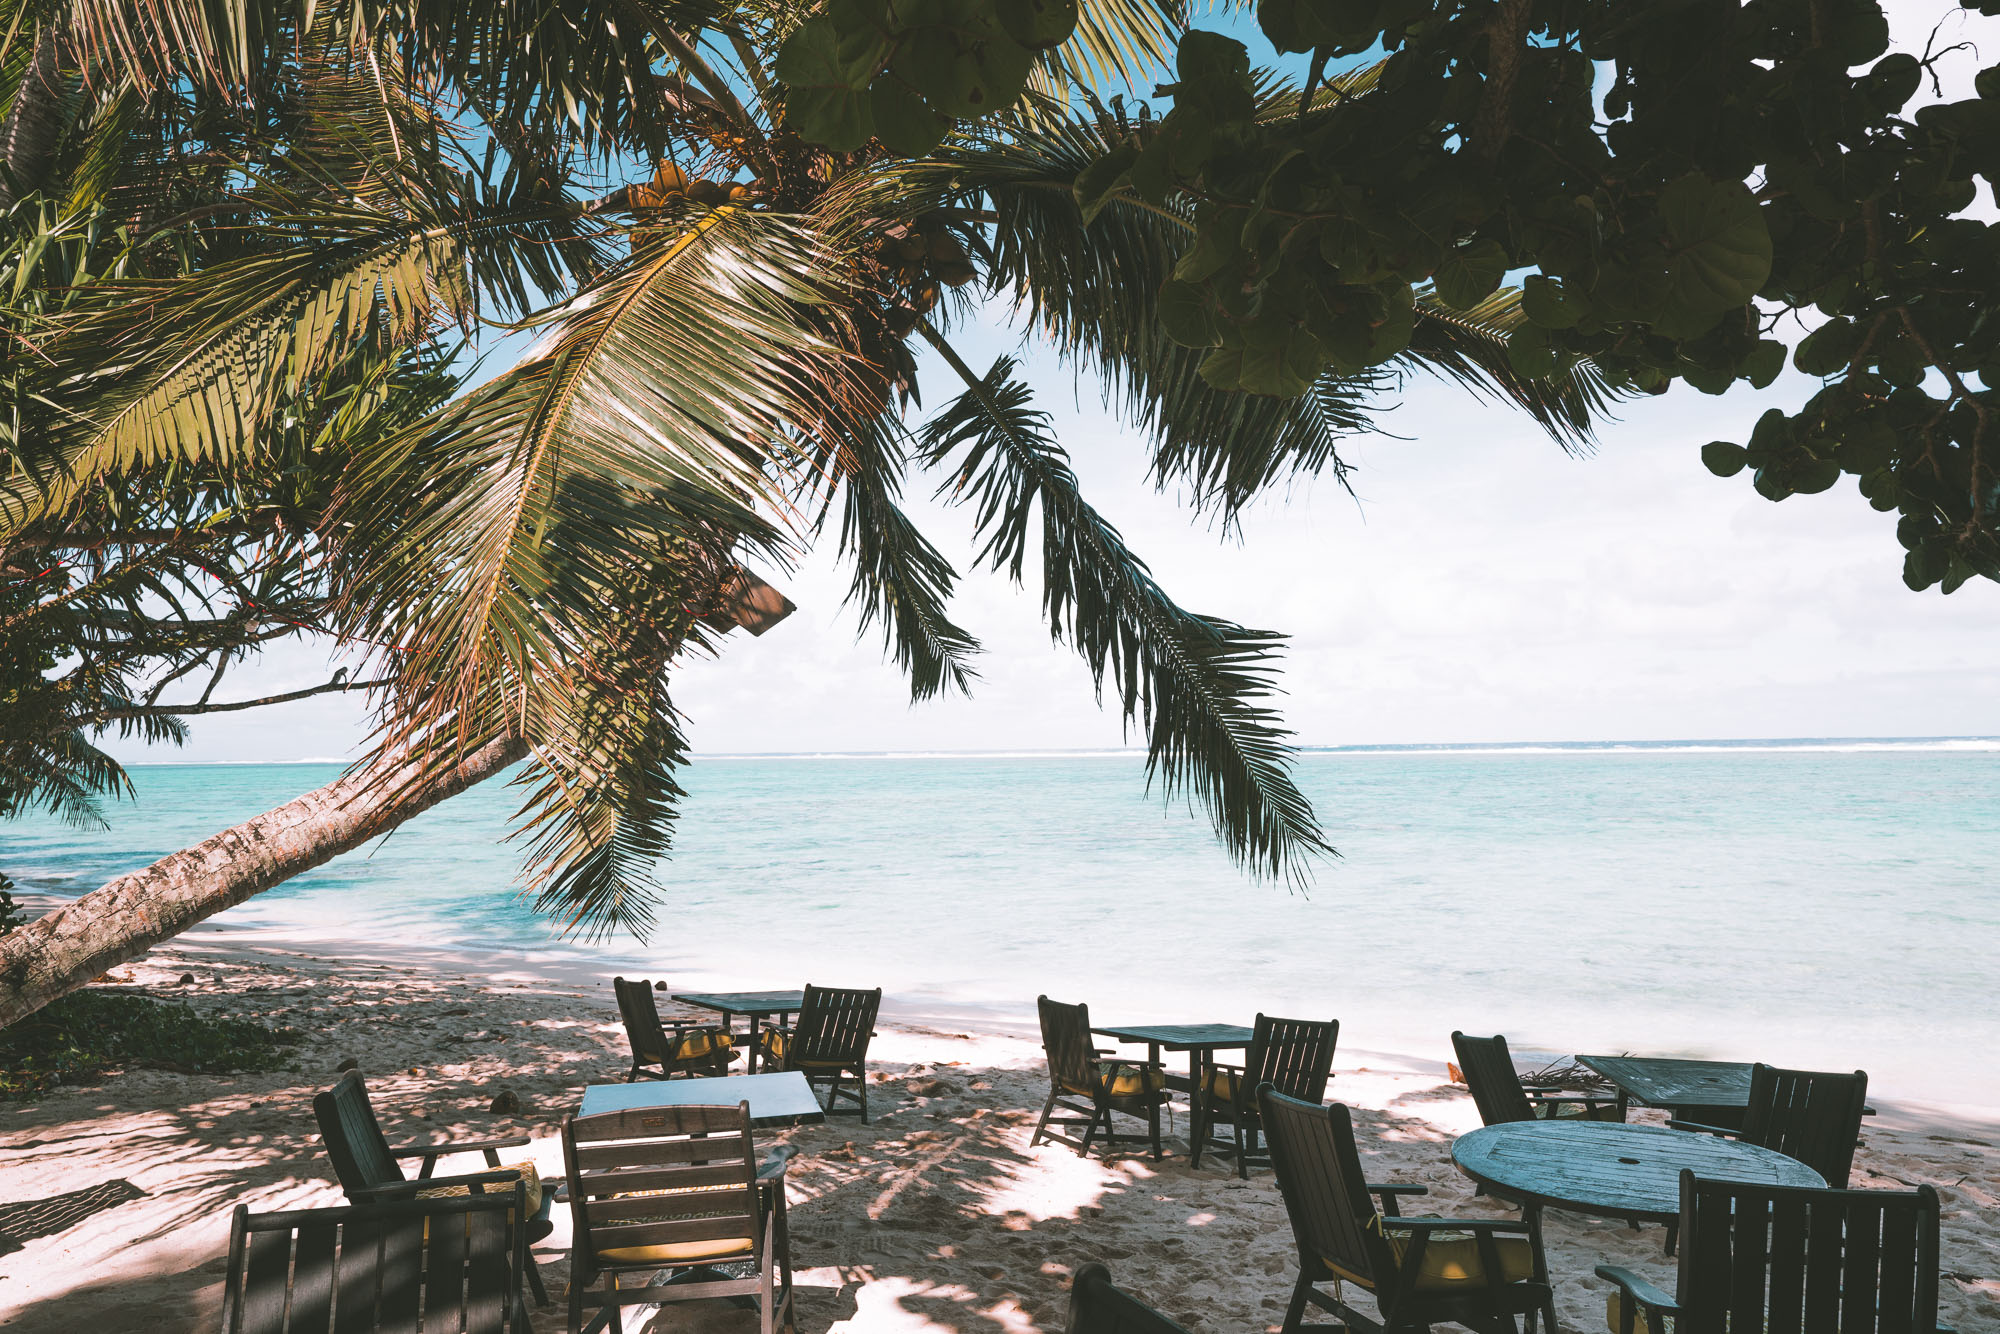 Beachfront lunch on Rarotonga Cook Islands | Find Us Lost